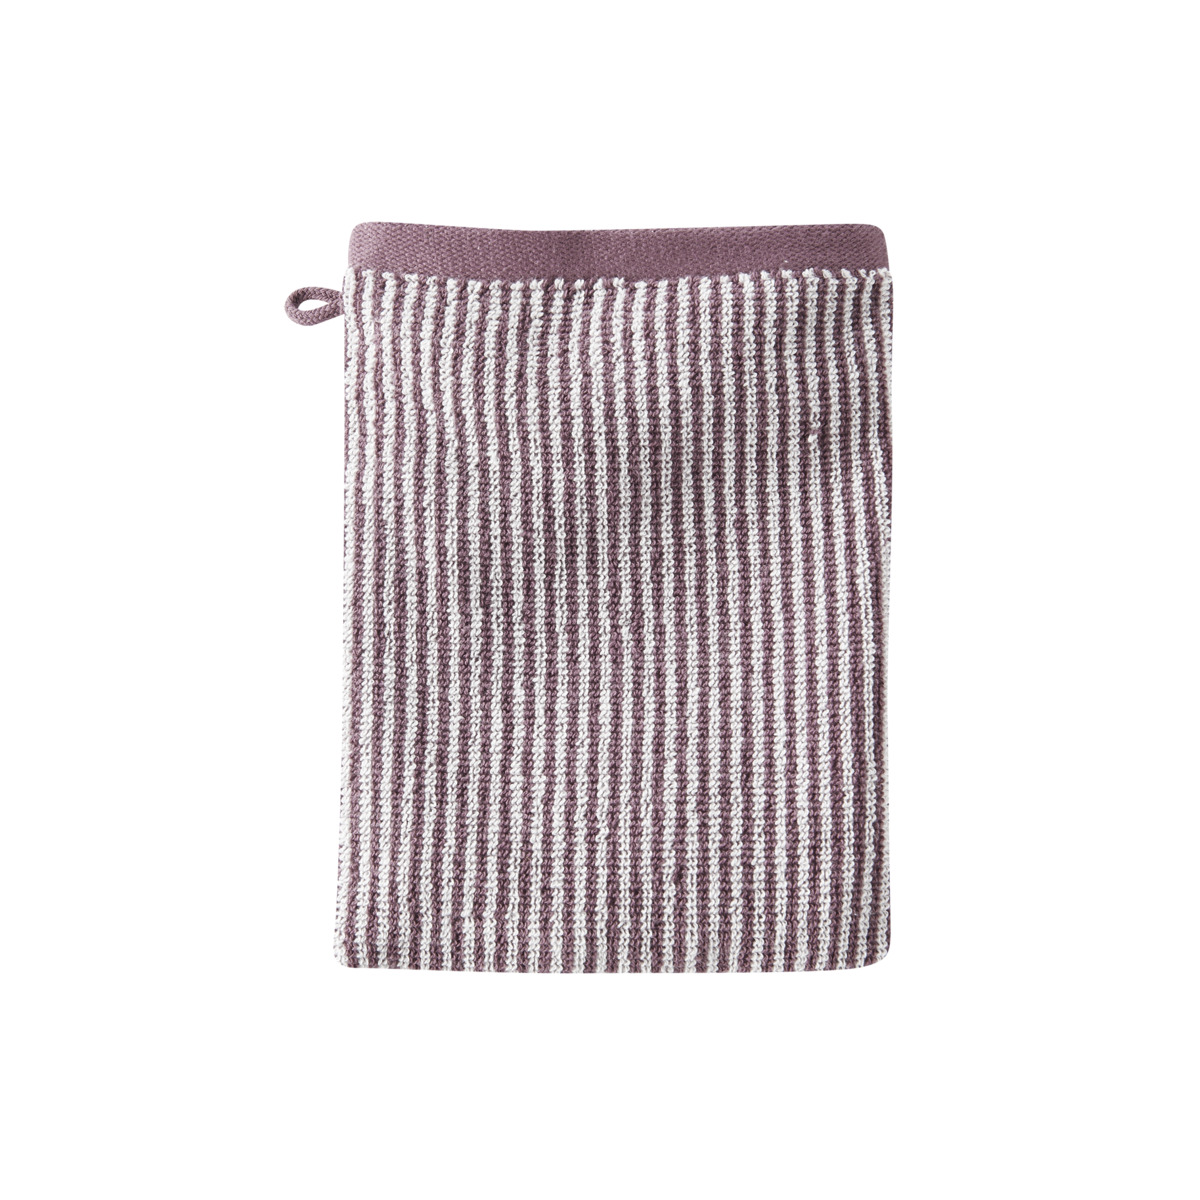 Striped Washing glove, pack of 2, BARCELONA